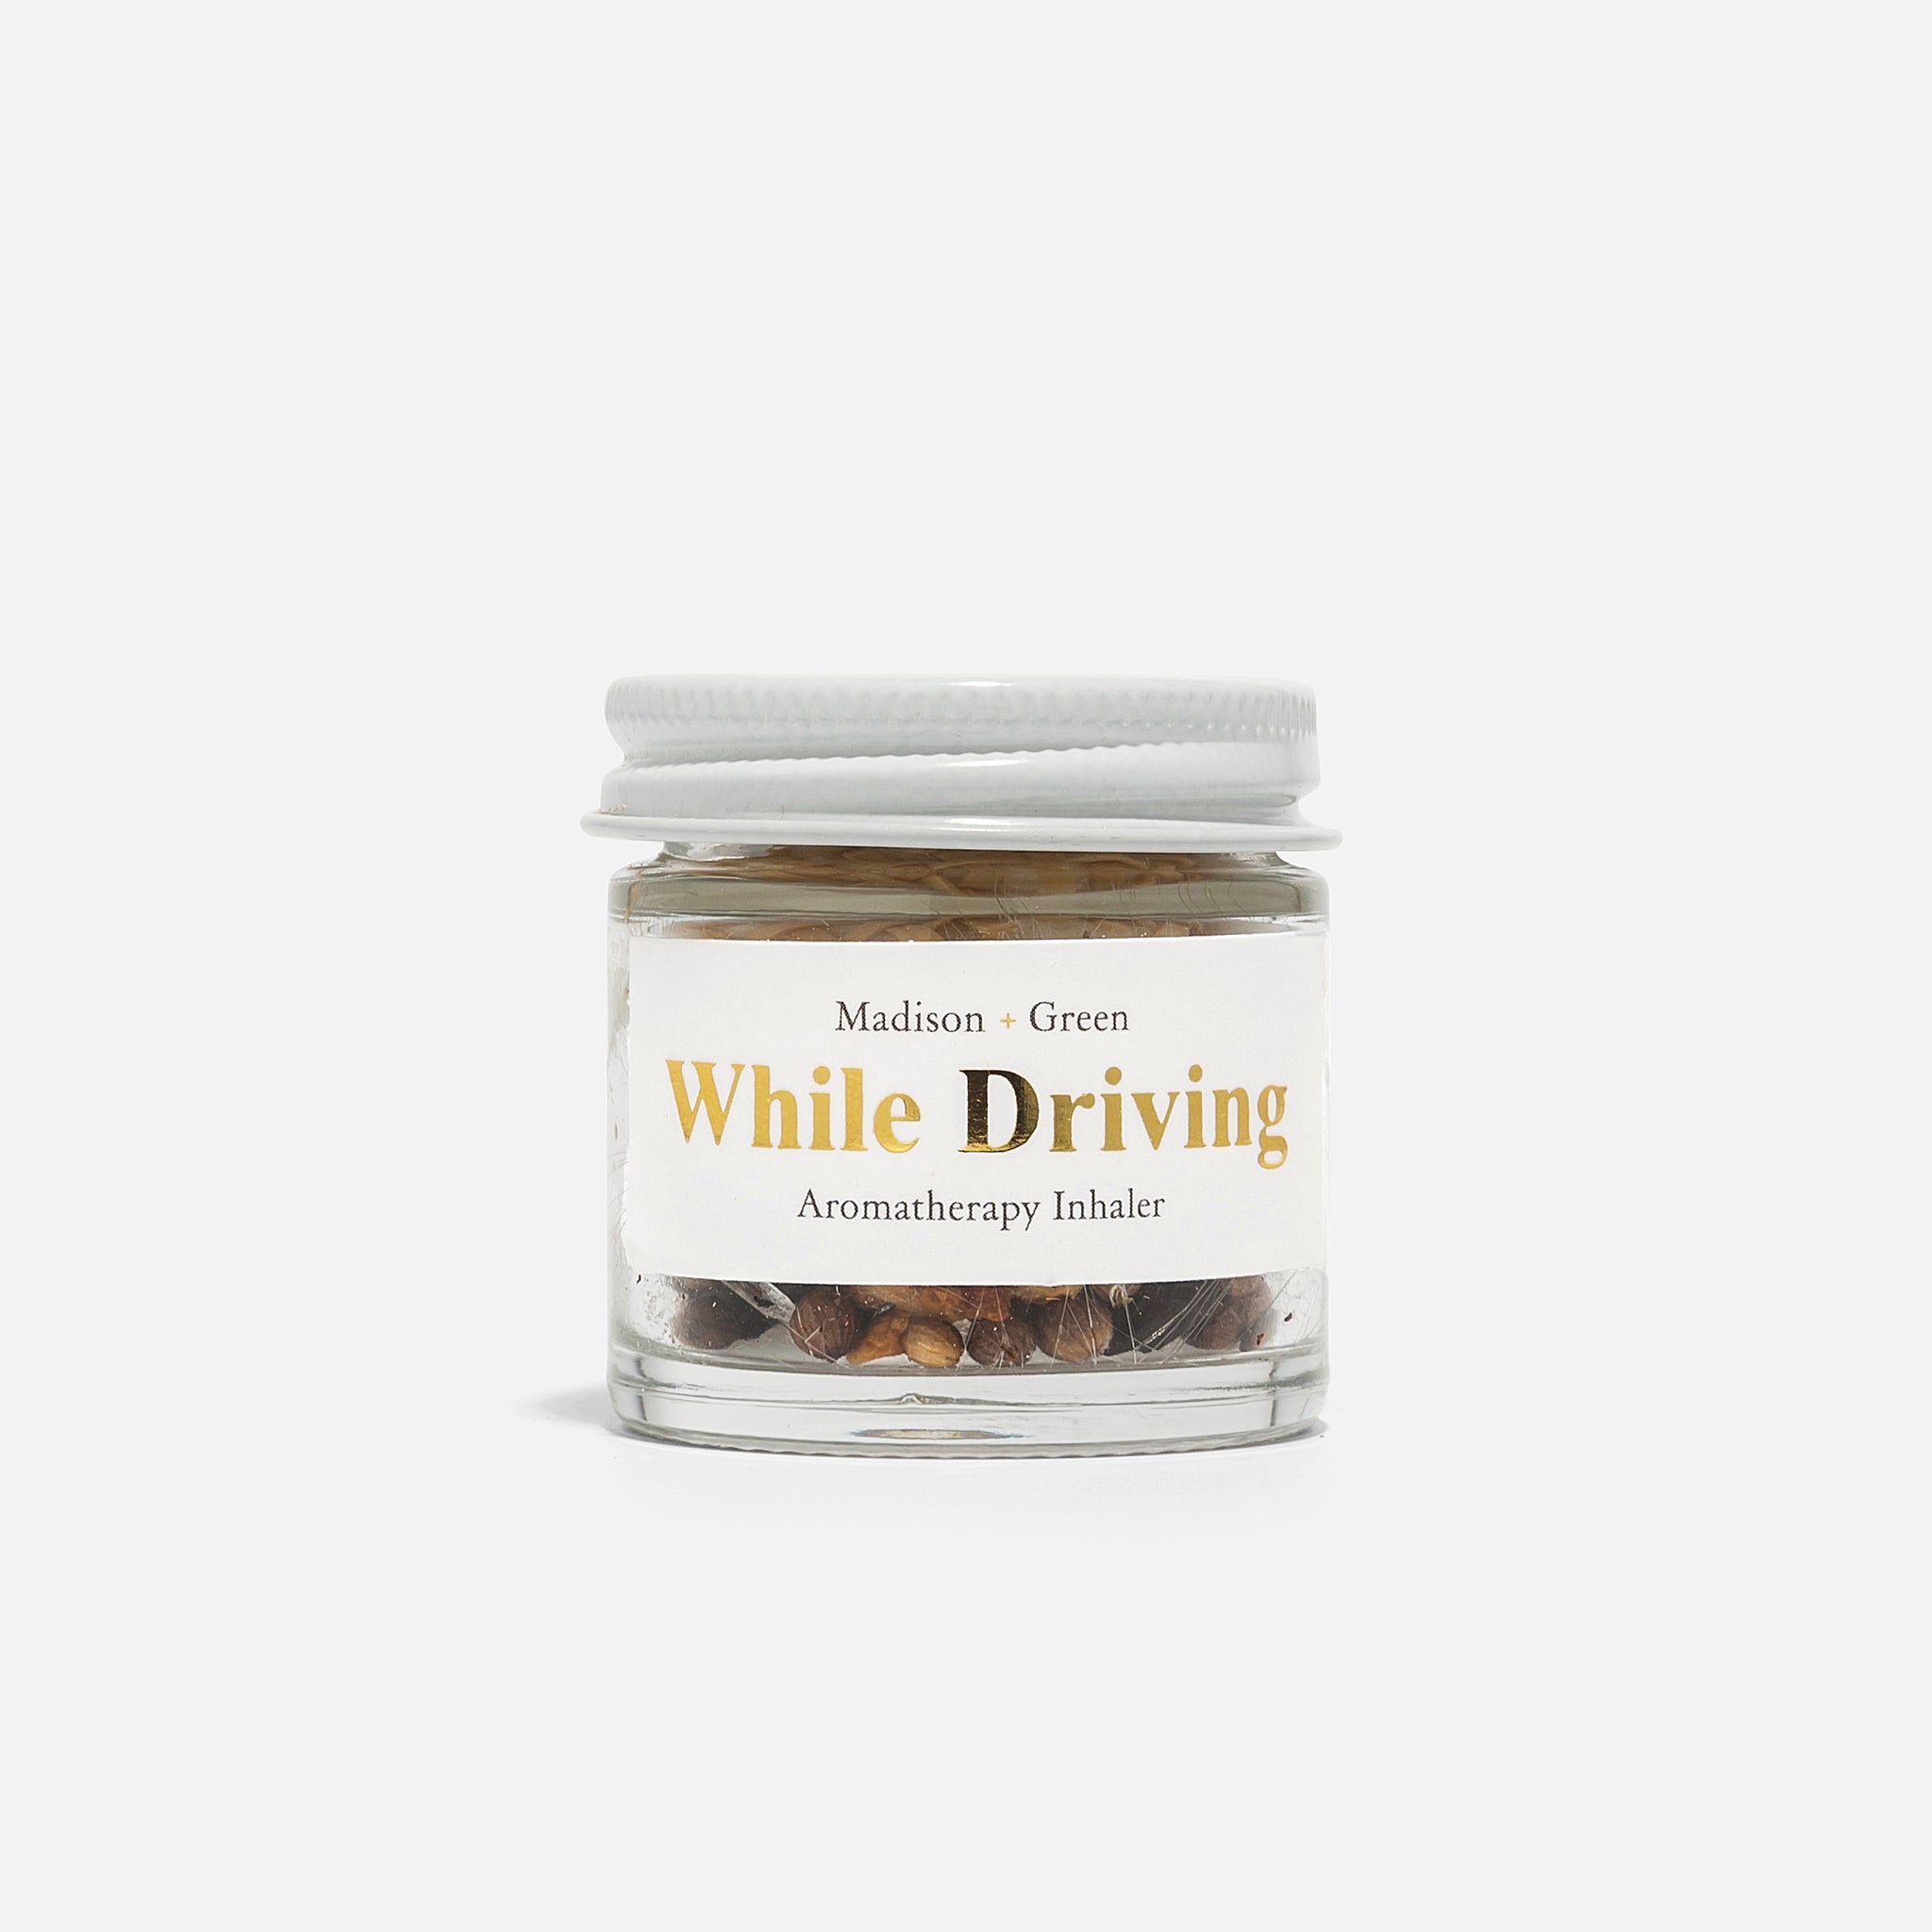 "While Driving" Aromatherapy Stress Reliever for the Road